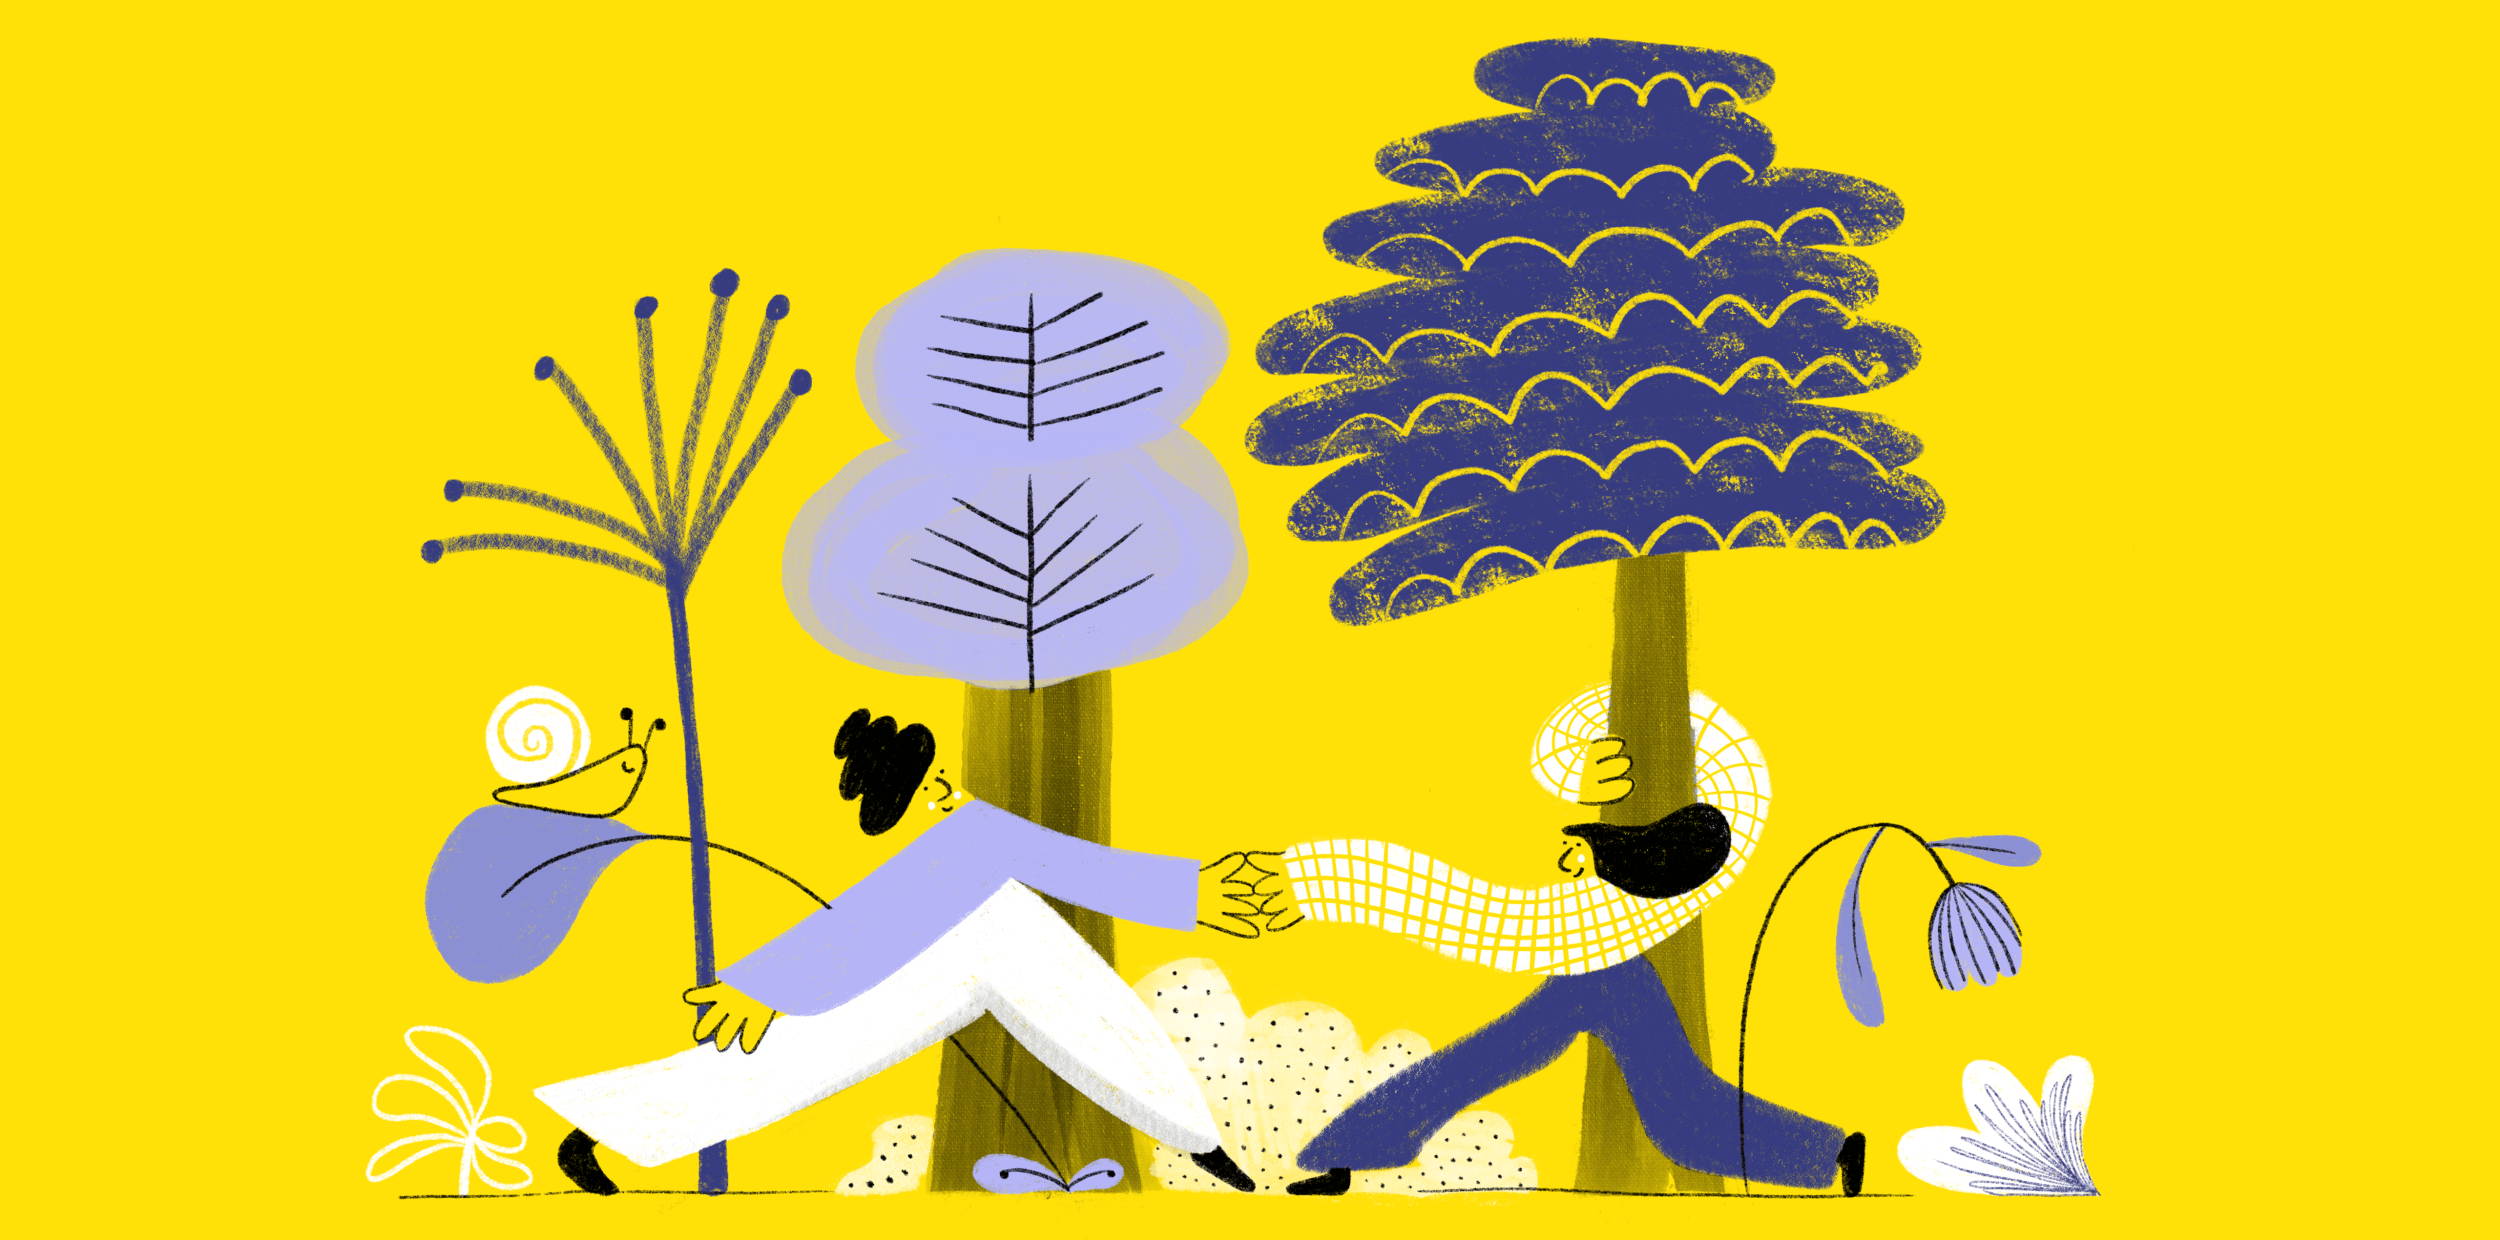 Illustration of two people holding hands in a nature setting